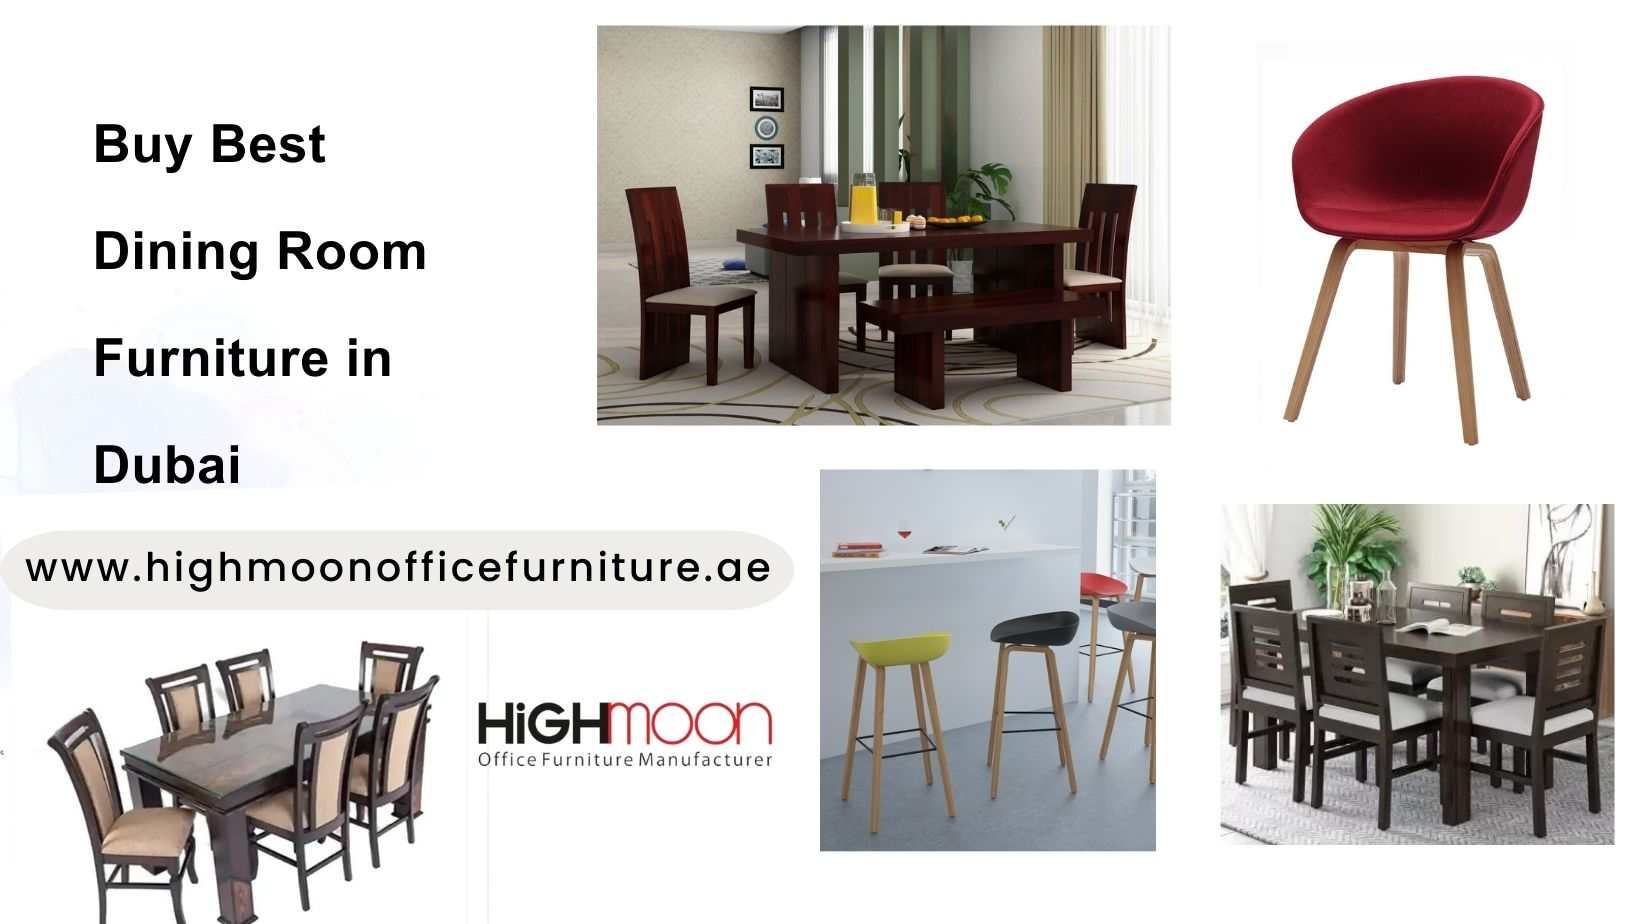 Buy Best Dining Room Furniture in Dubai from Highmoon